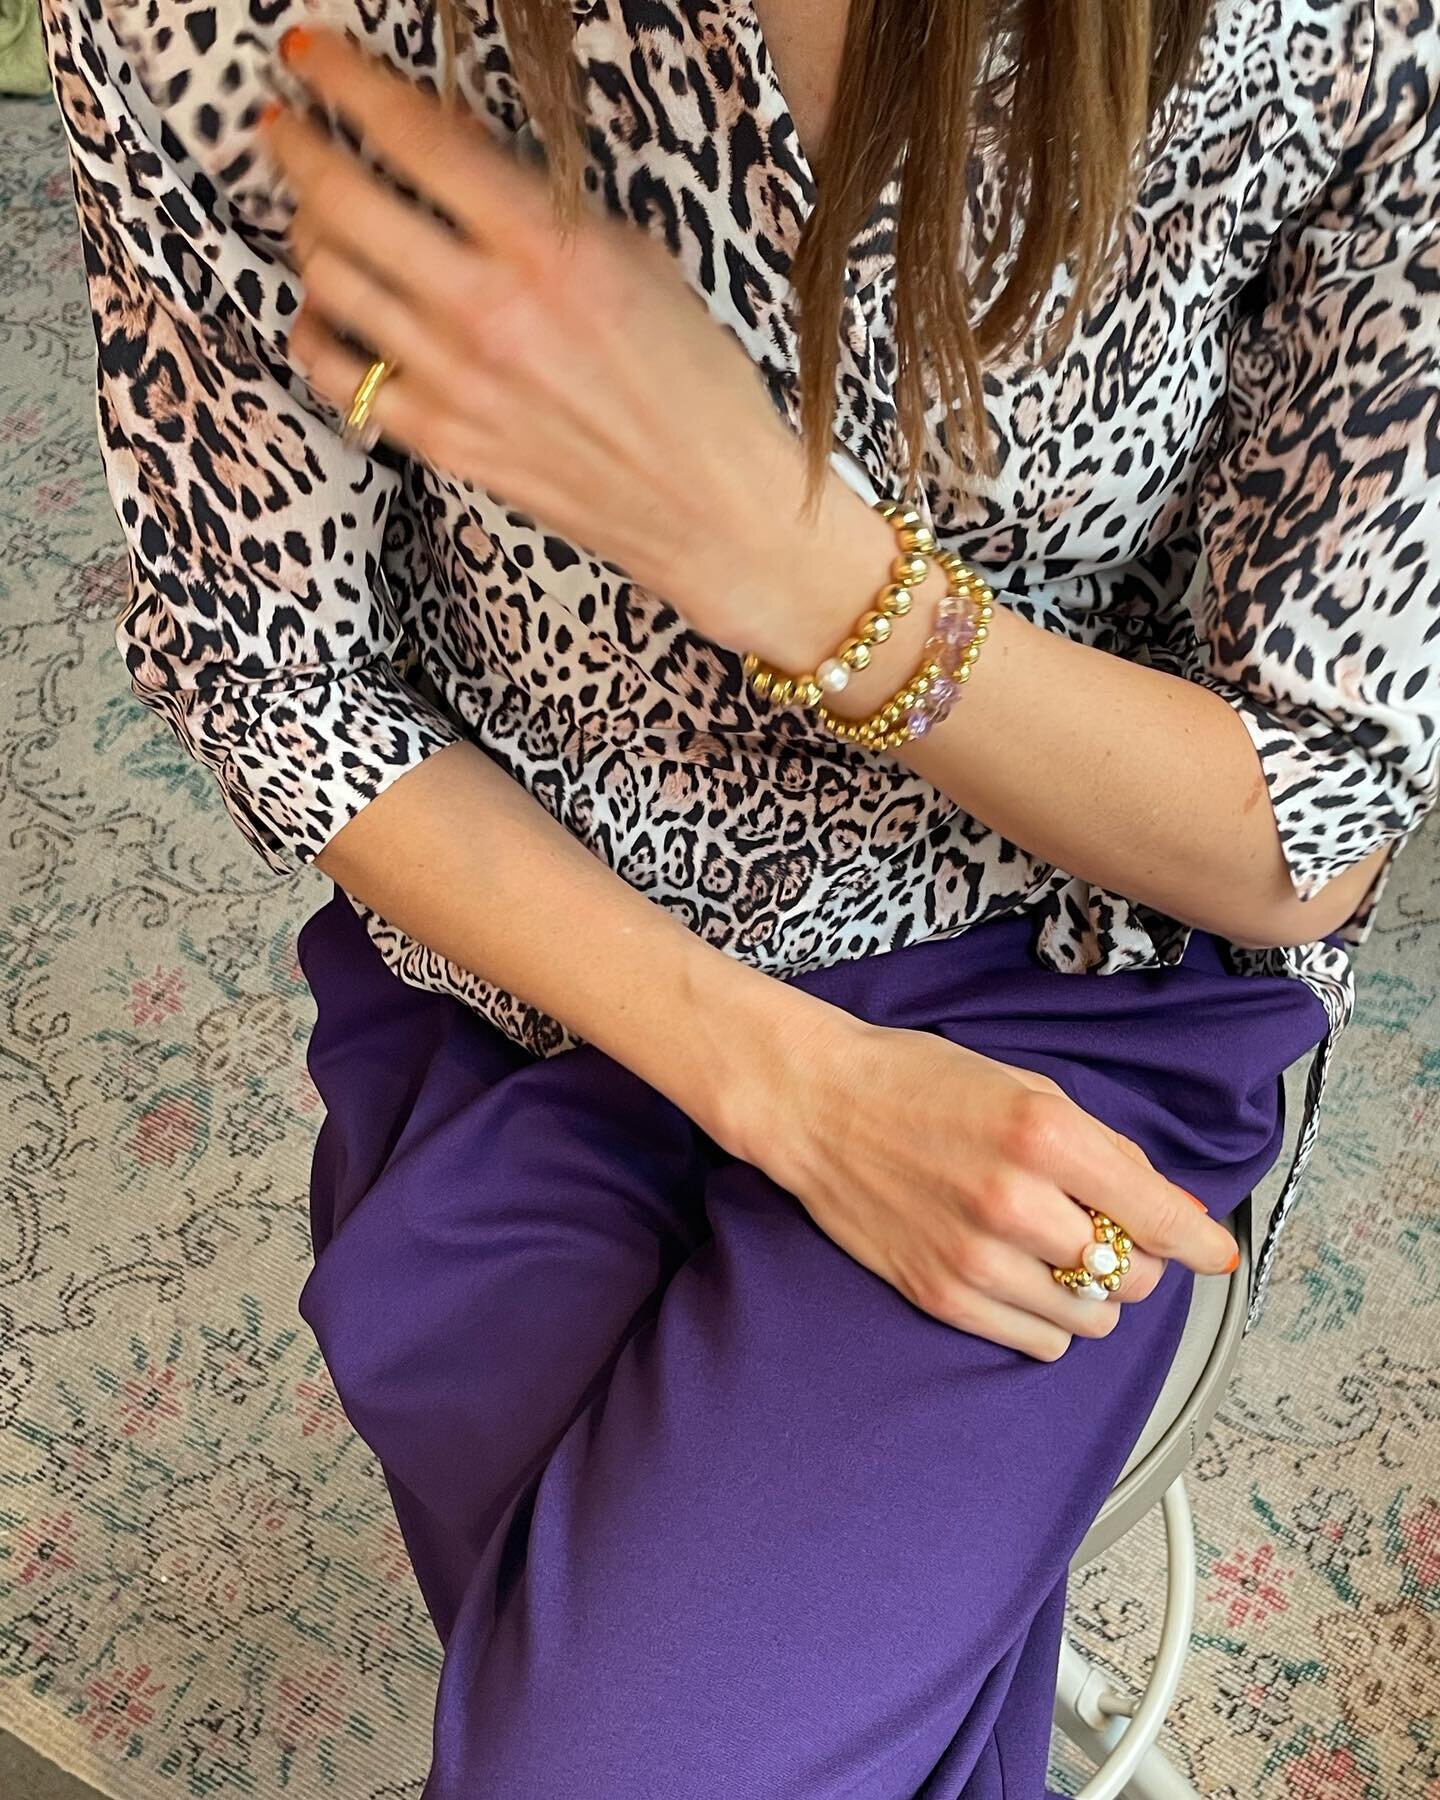 NEW FL JEWELLERY DESIGNS &ndash; styled with our leo wrap blouse &amp; wide comfy pants &ndash; now available 

#accessories #handmadeaccessory #jewellery #handmade #handmadefashion #g&ouml;ttingen #boutique